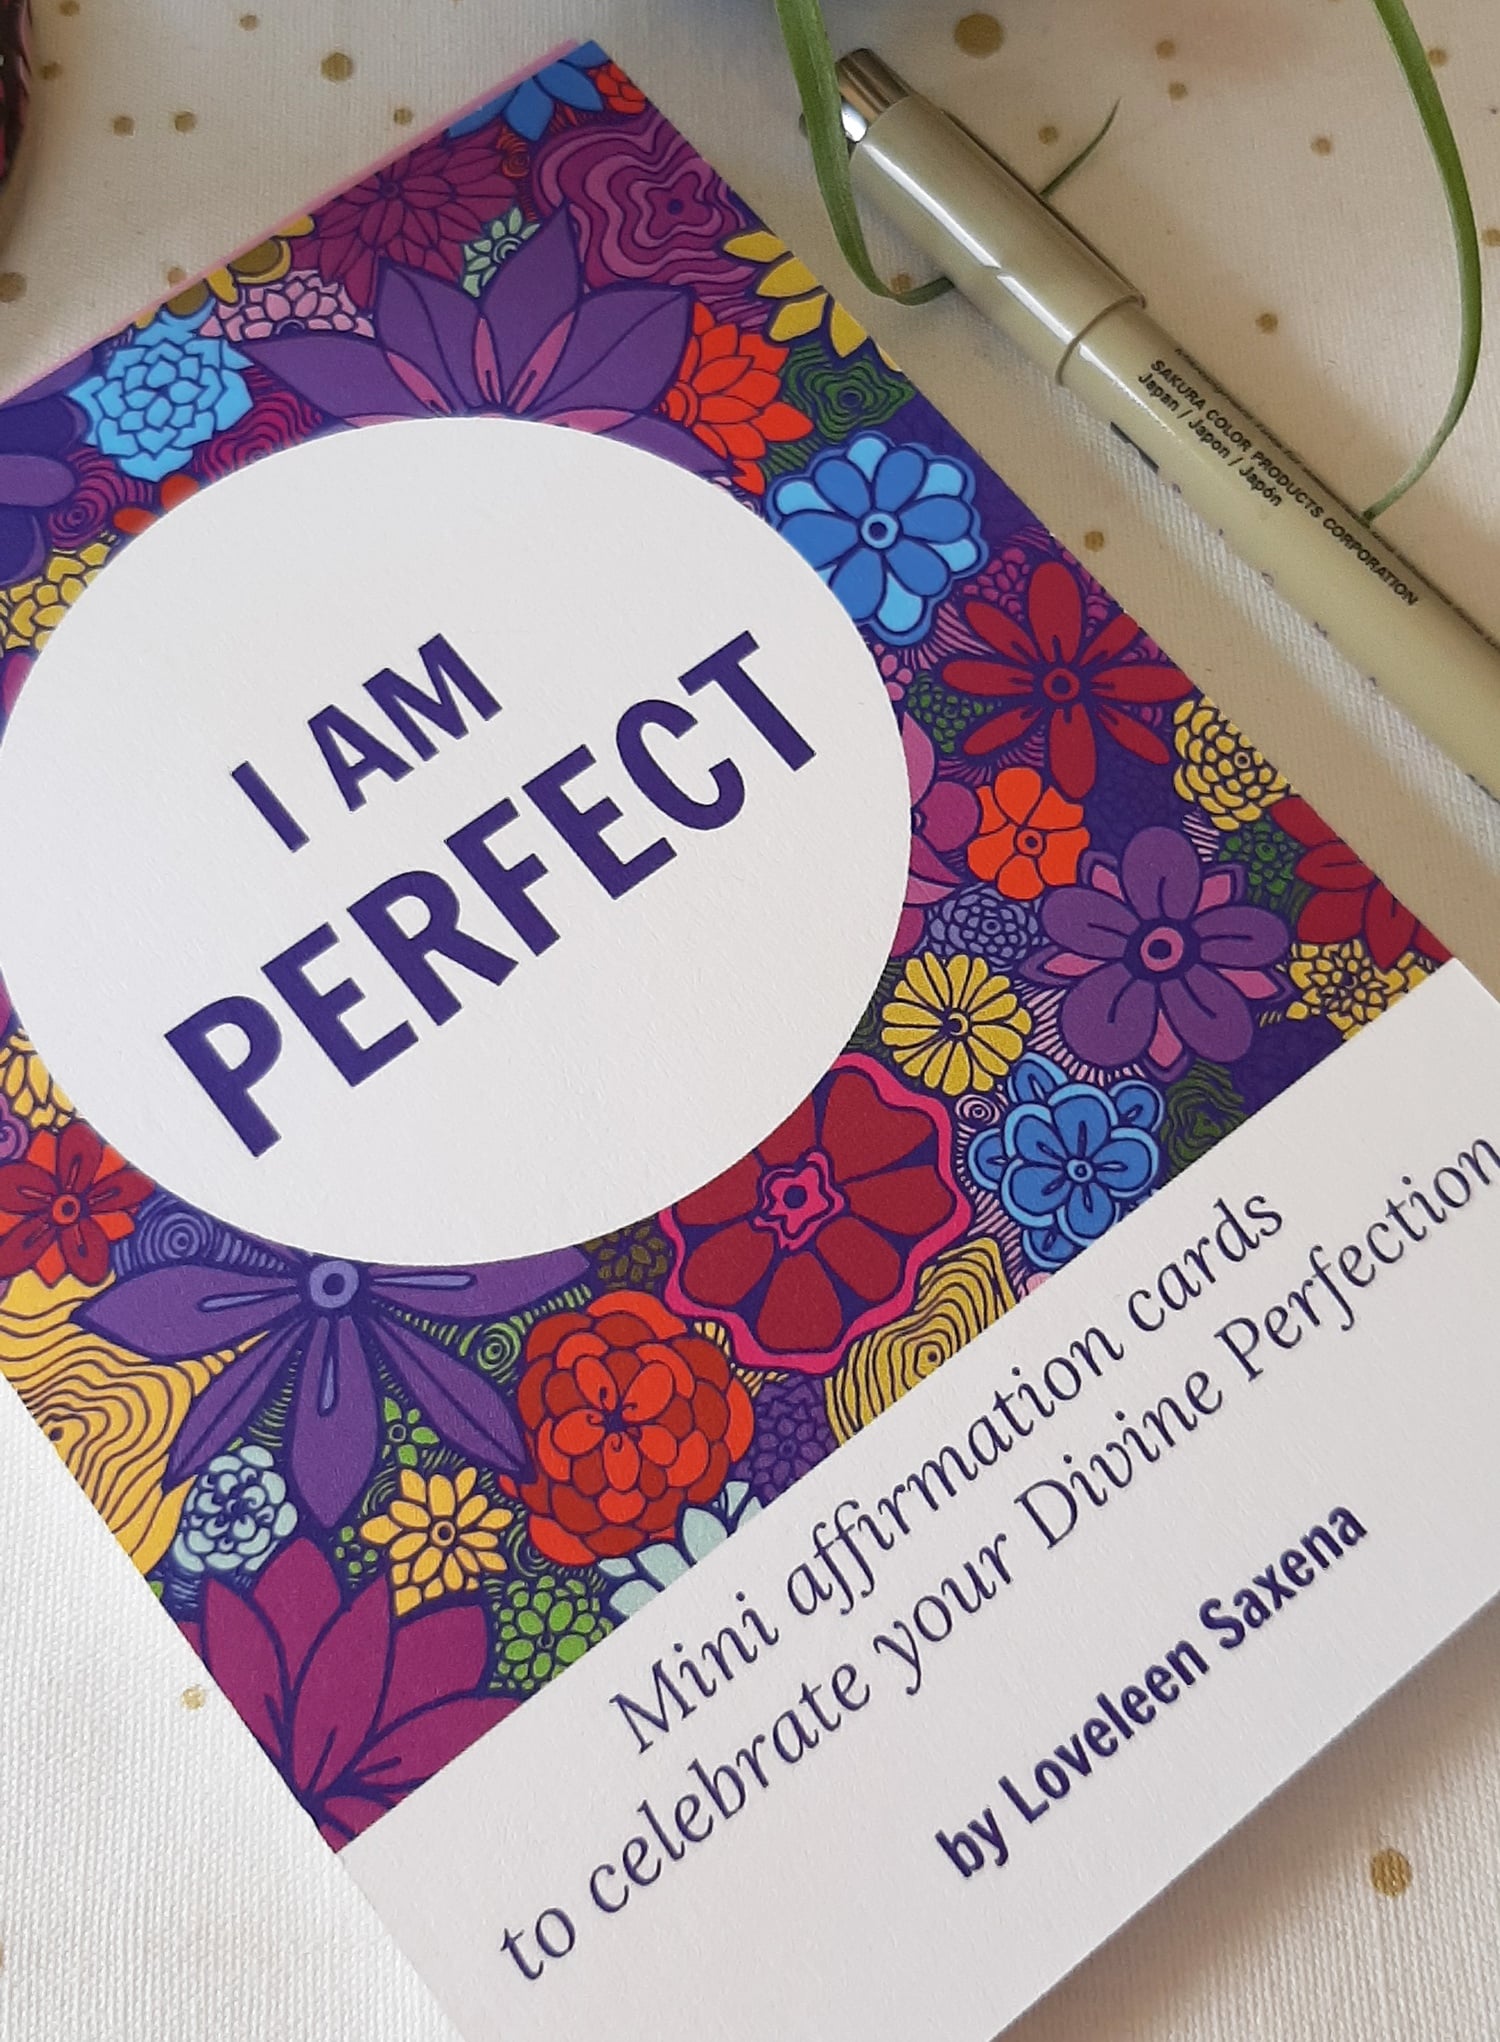 i am perfect affirmation cards and pen